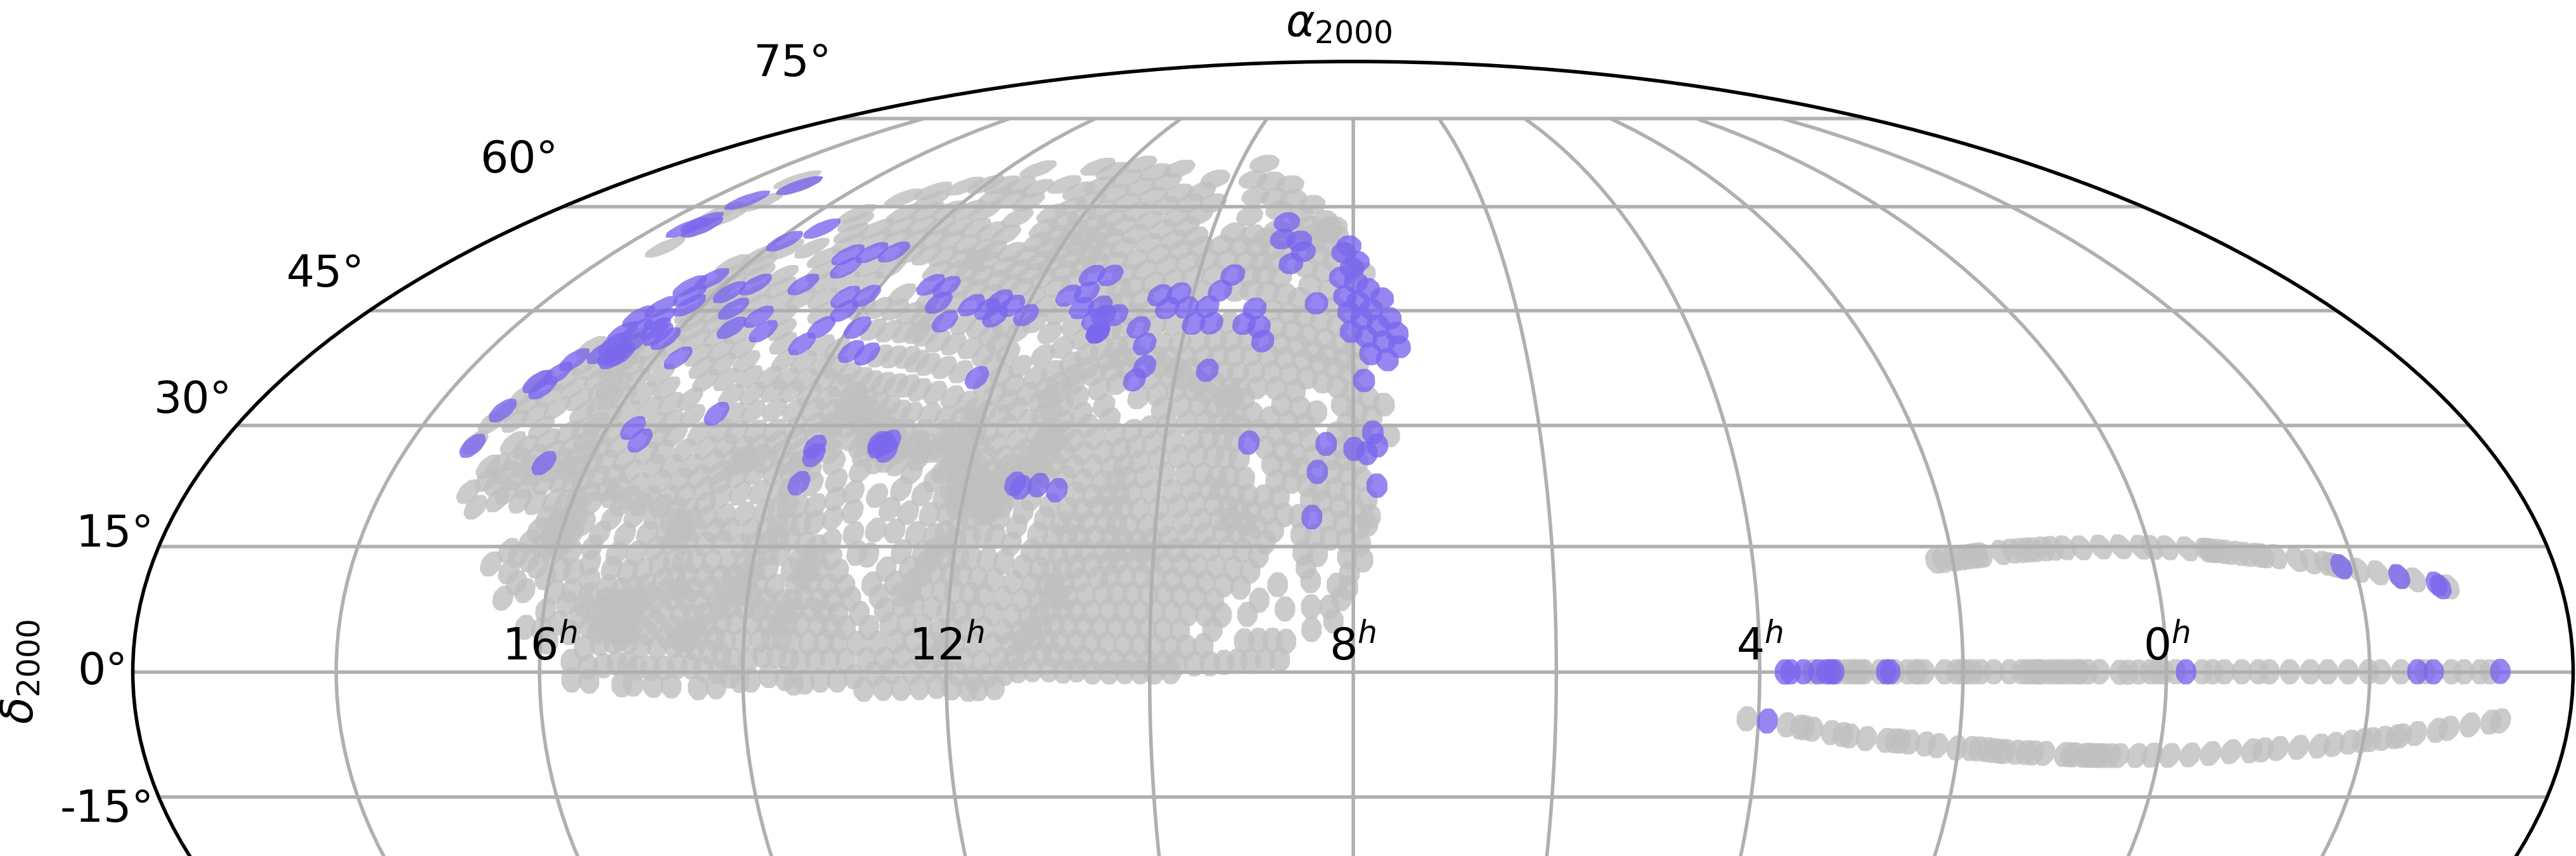 The MaNGA survey area, consisting primarily of galaxies in the northern galactic cap.